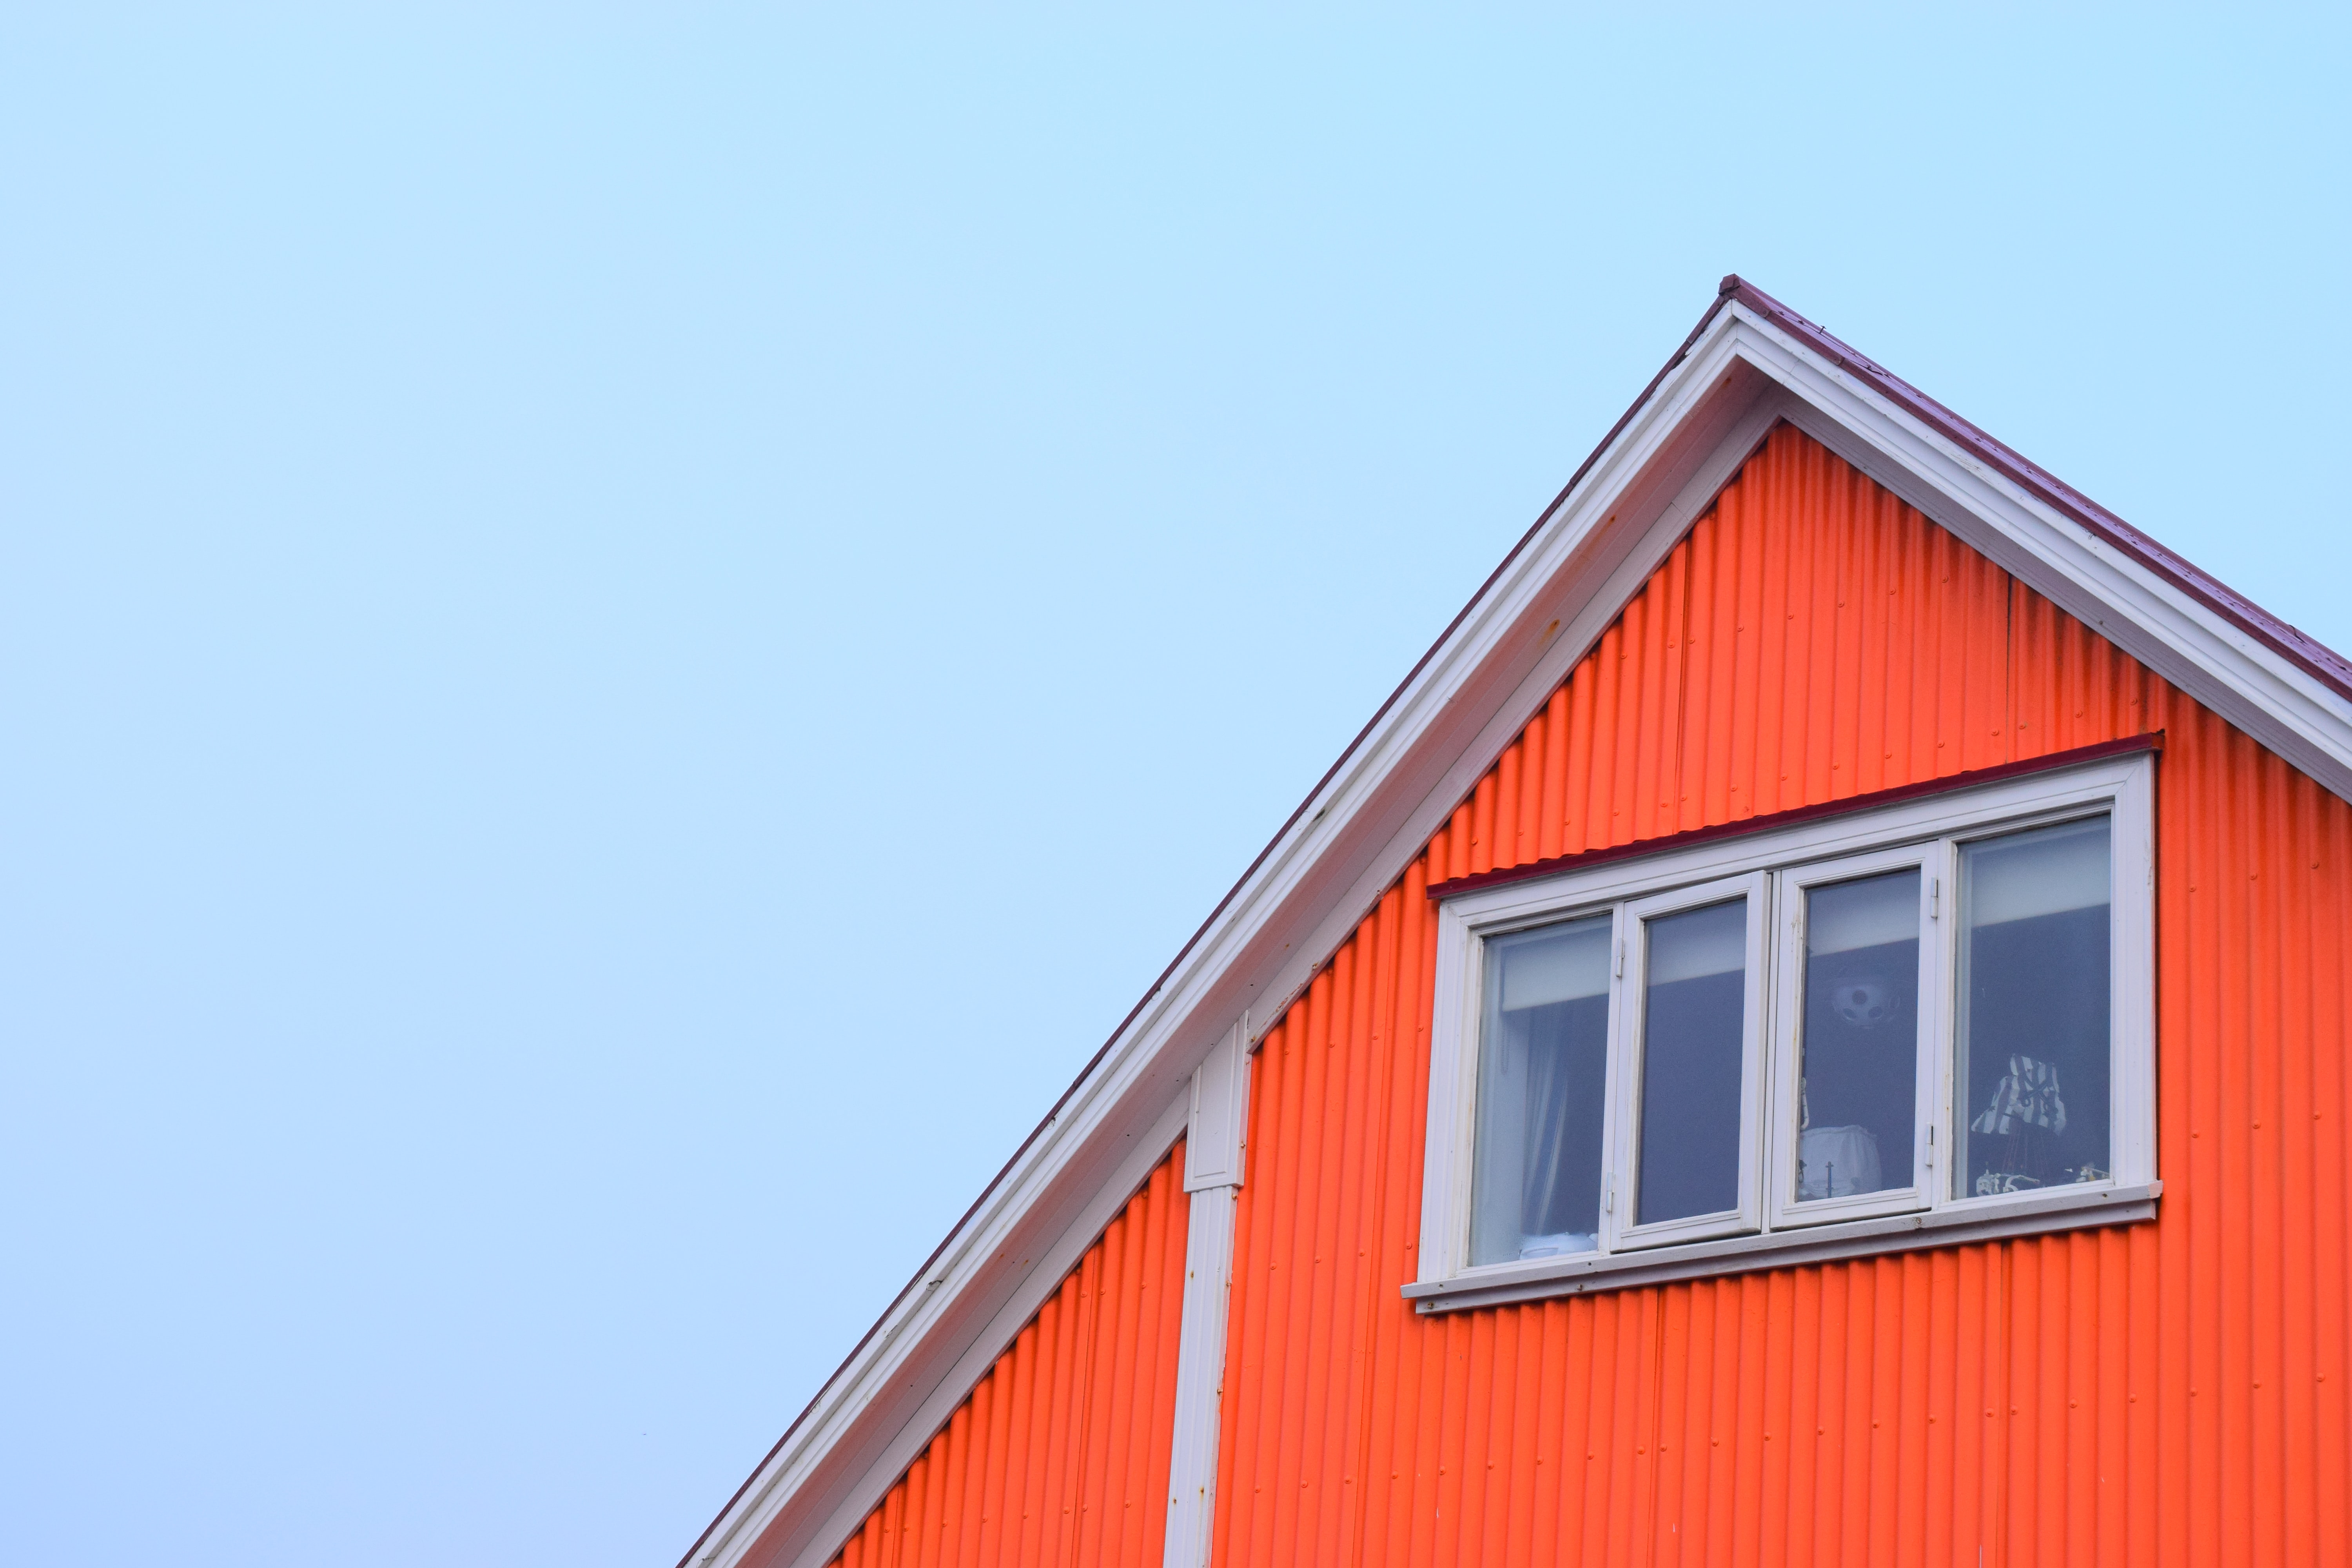 Photo of orange house peak in Iceland with window in center, can see lamp through window